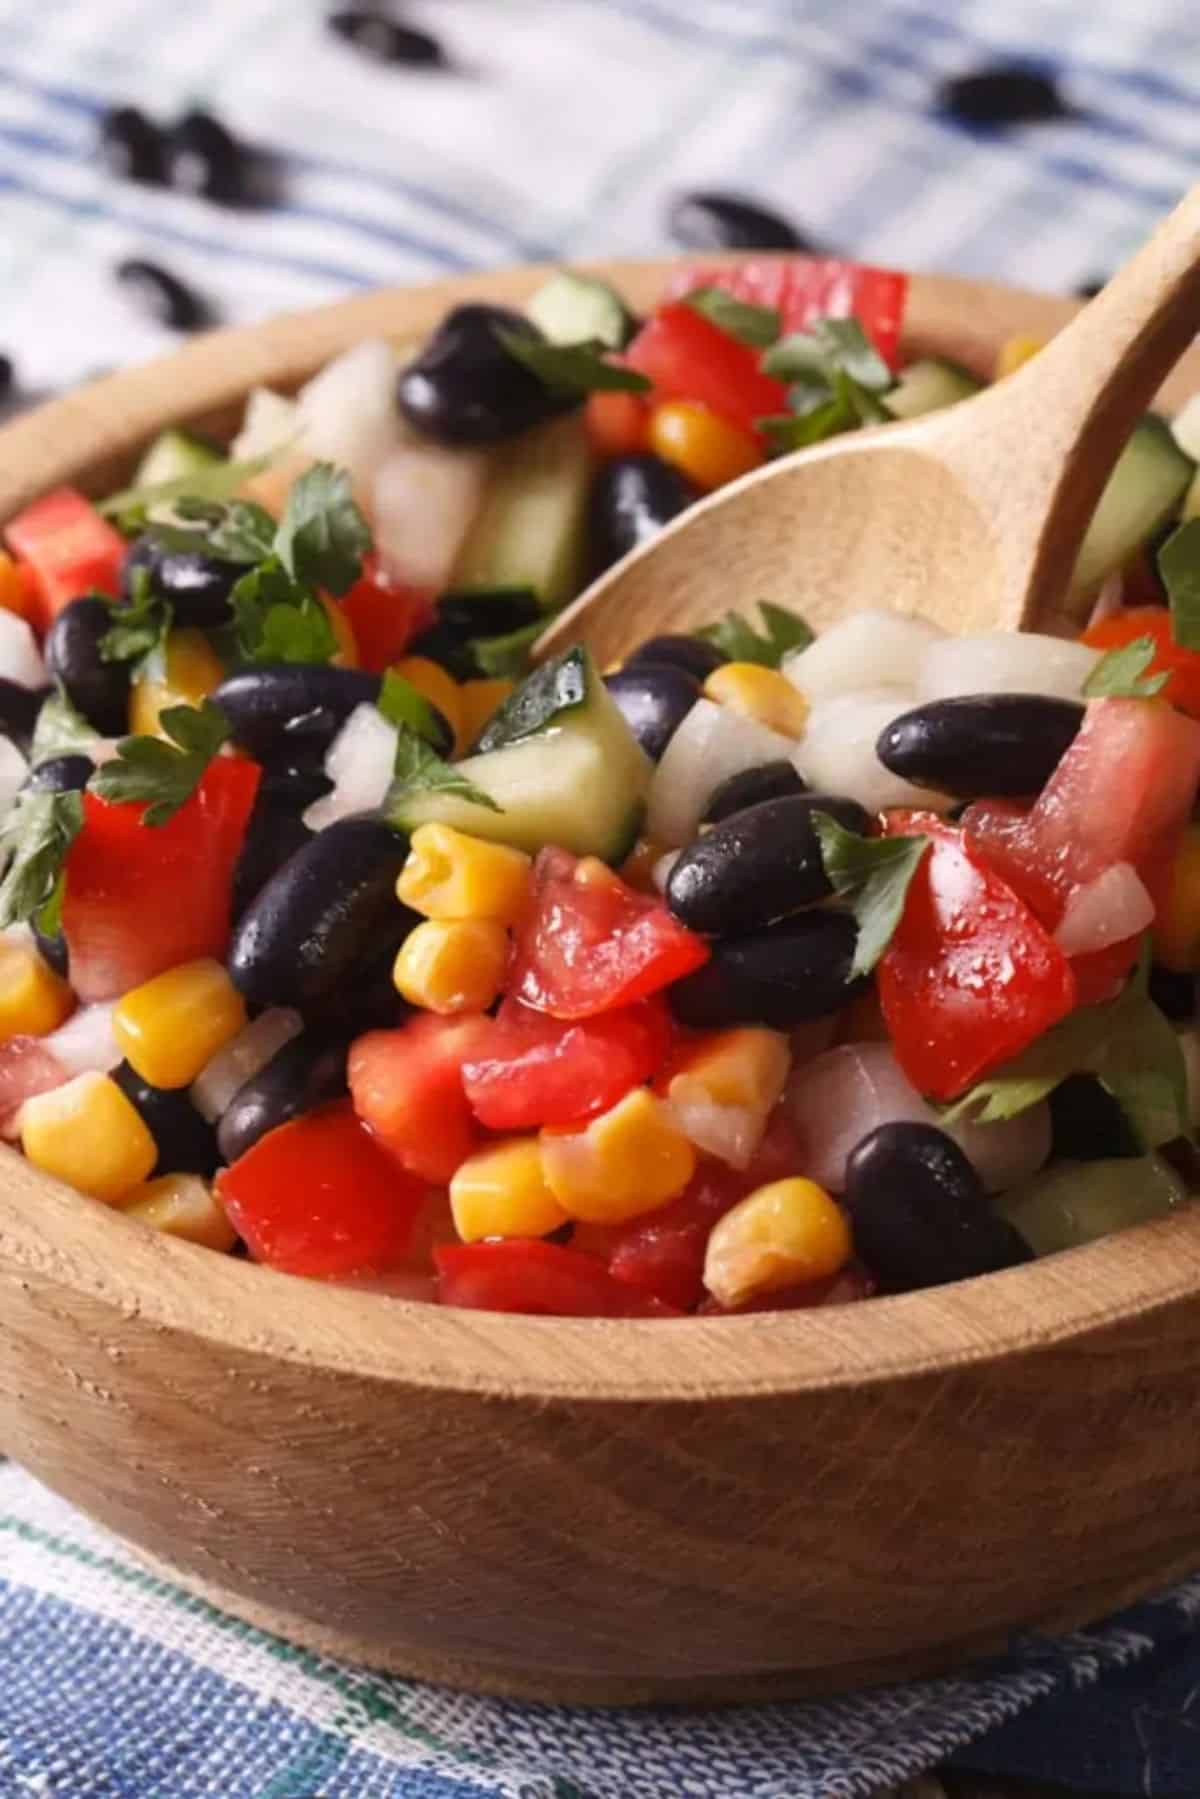 Healthy High Protein Mexican Bean Salad in a wooden bowl with a wooden spoon.